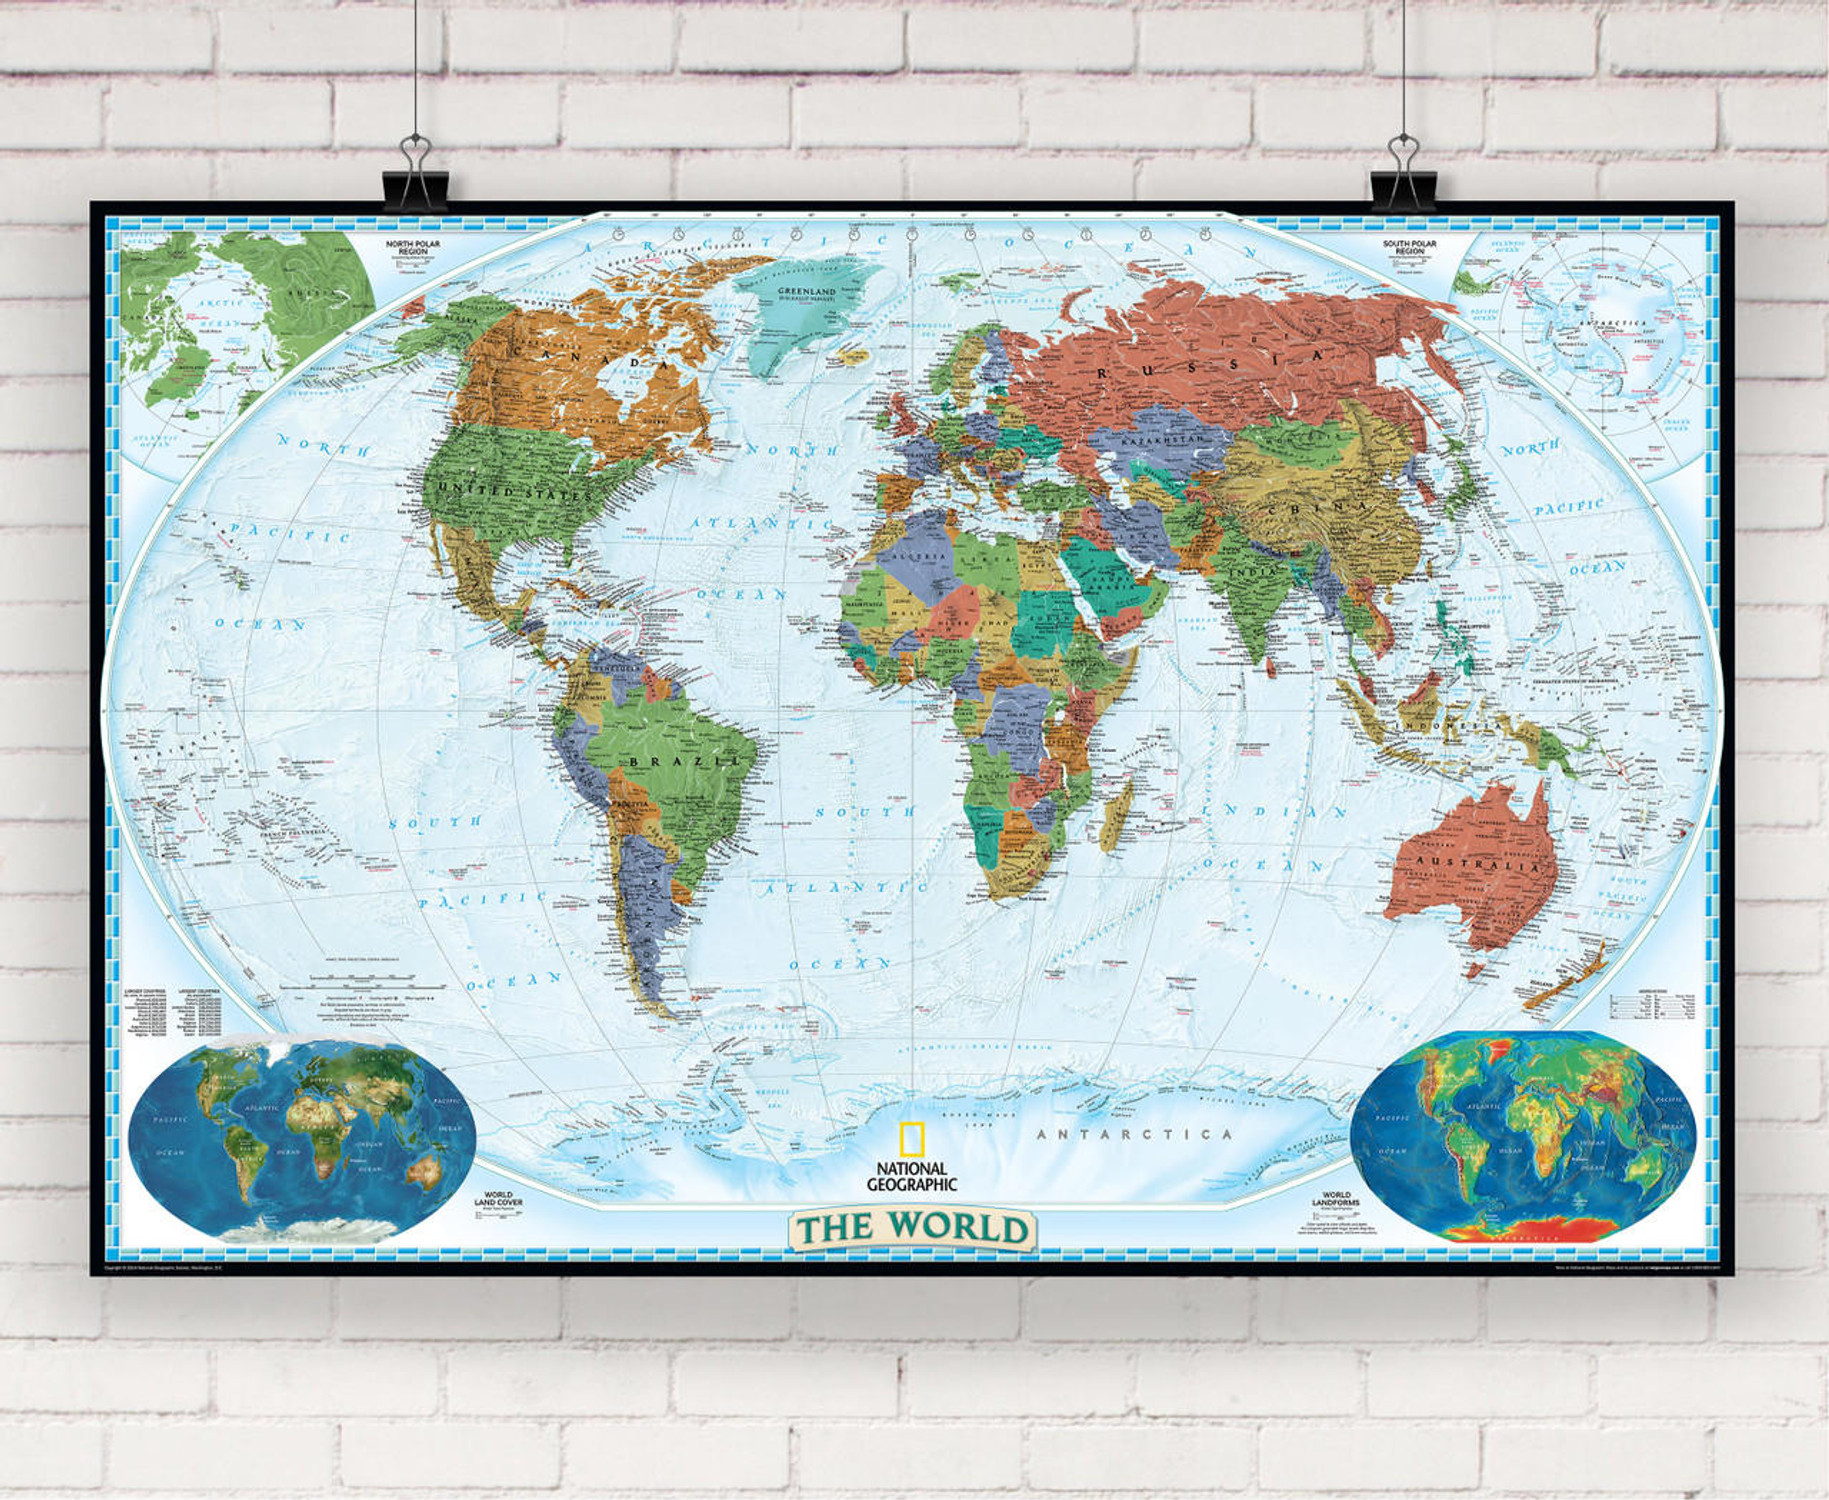 National Geographic World Decorator Wall Map, image 1, World Maps Online